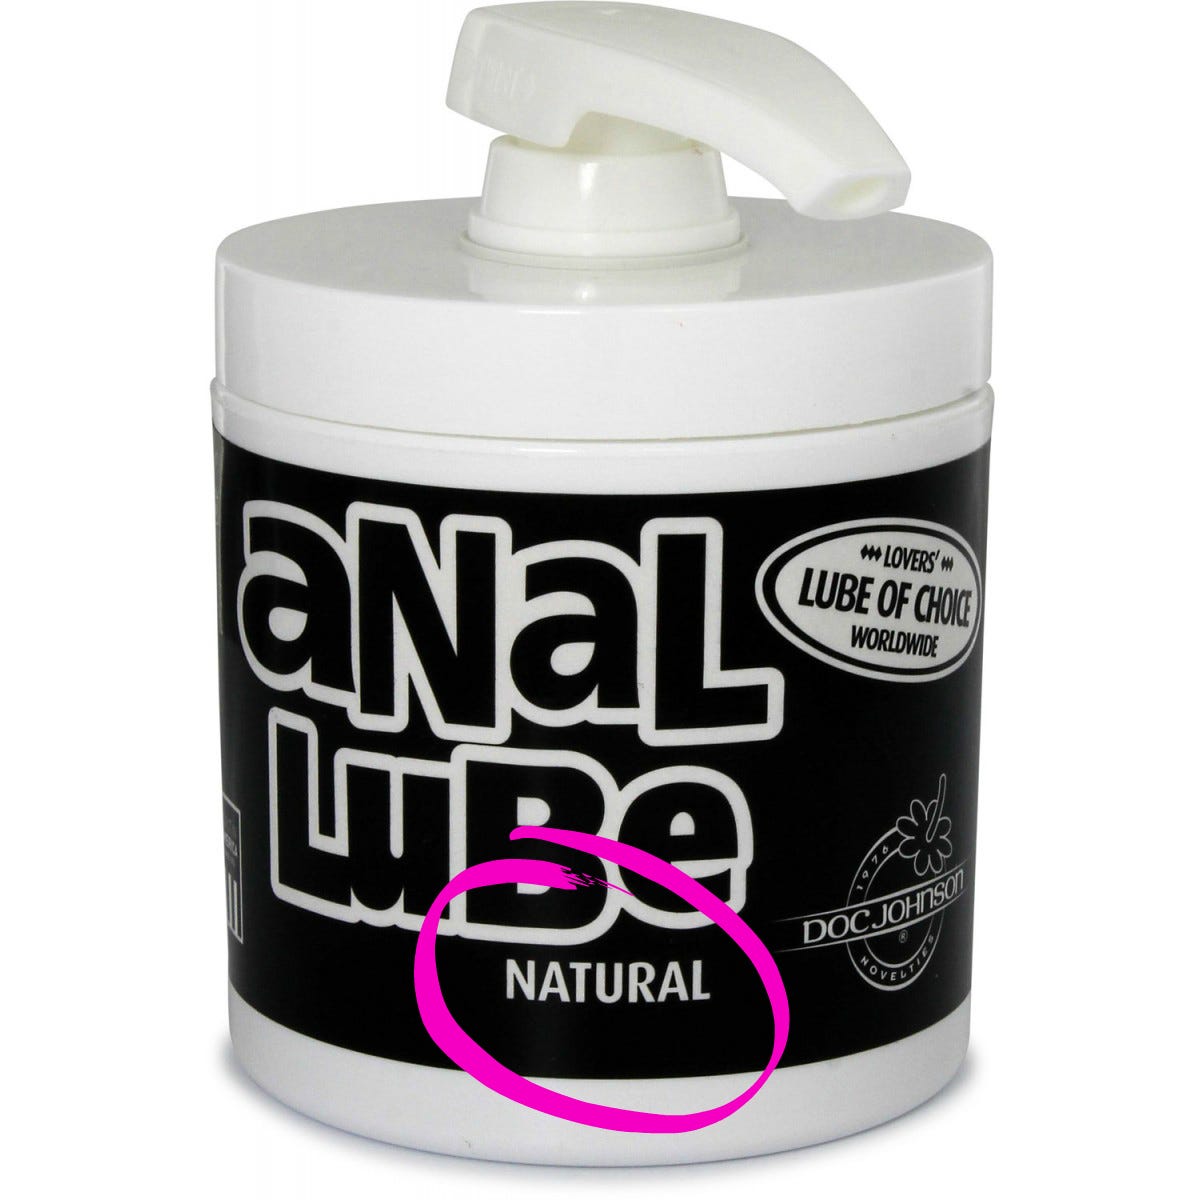 NATURAL: The Anal Lube for your Wallet.